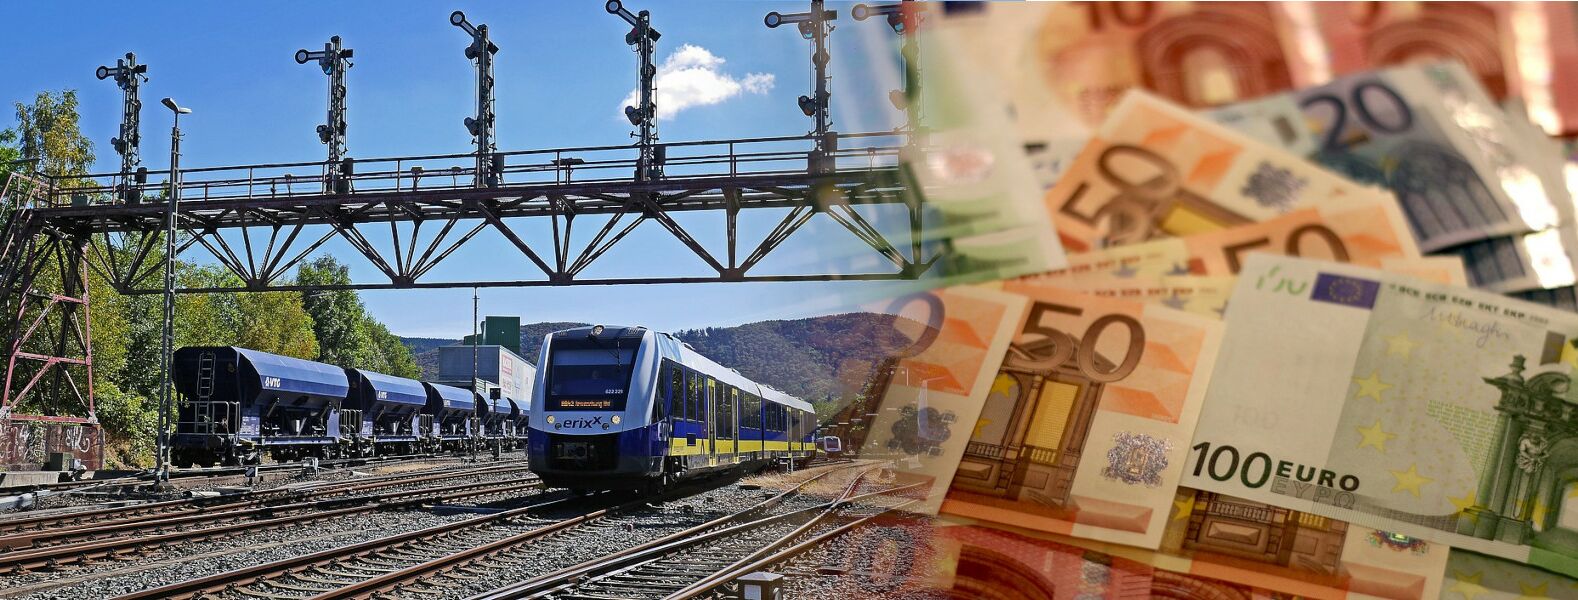 Collage of Erixx trainset at Bad Harzburg Exit Signals with Euro Bank Notes (© railML.org/Alexander Wolf with Pixabay images)